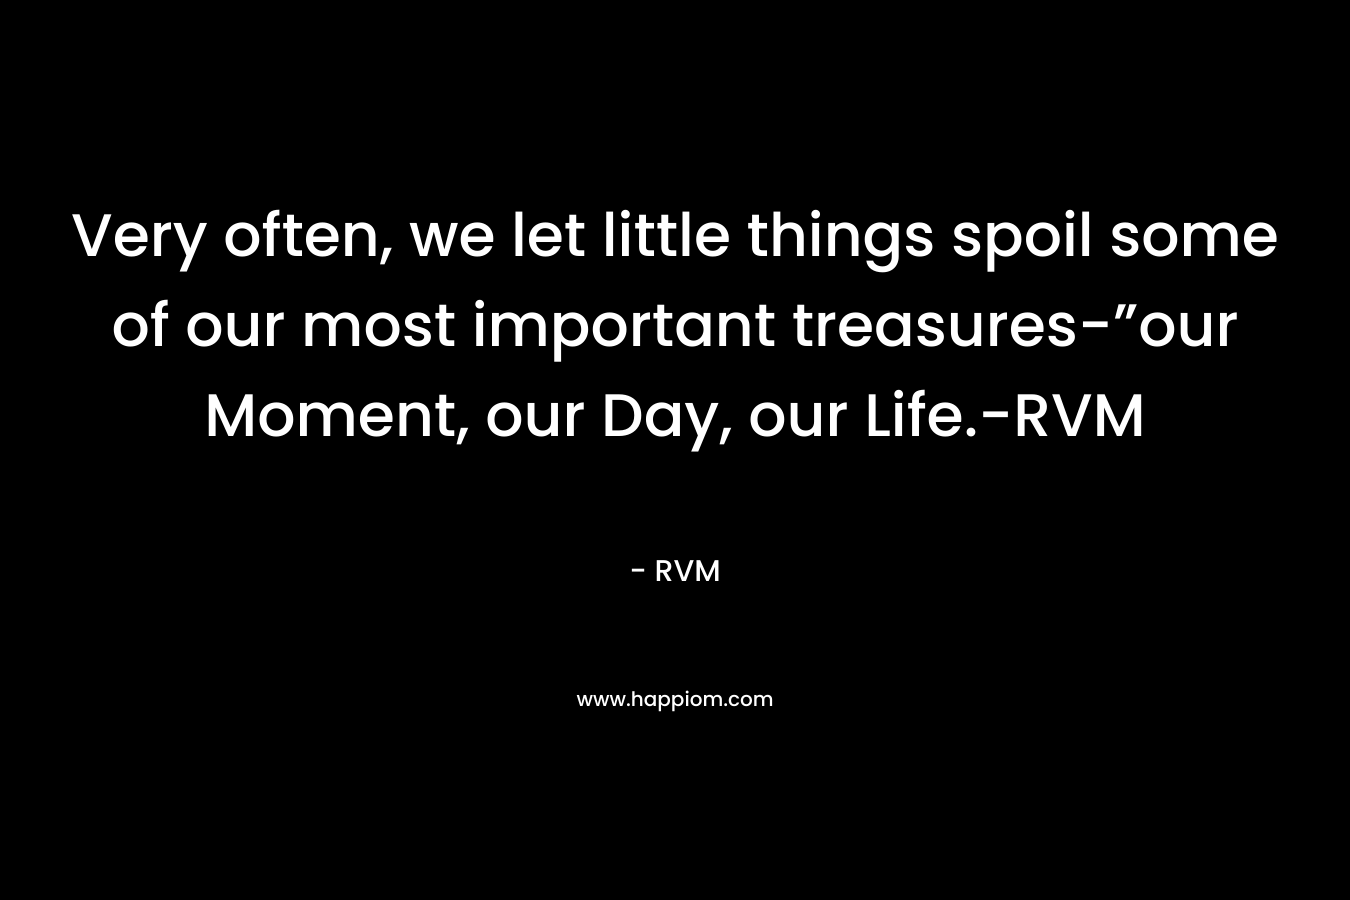 Very often, we let little things spoil some of our most important treasures-”our Moment, our Day, our Life.-RVM